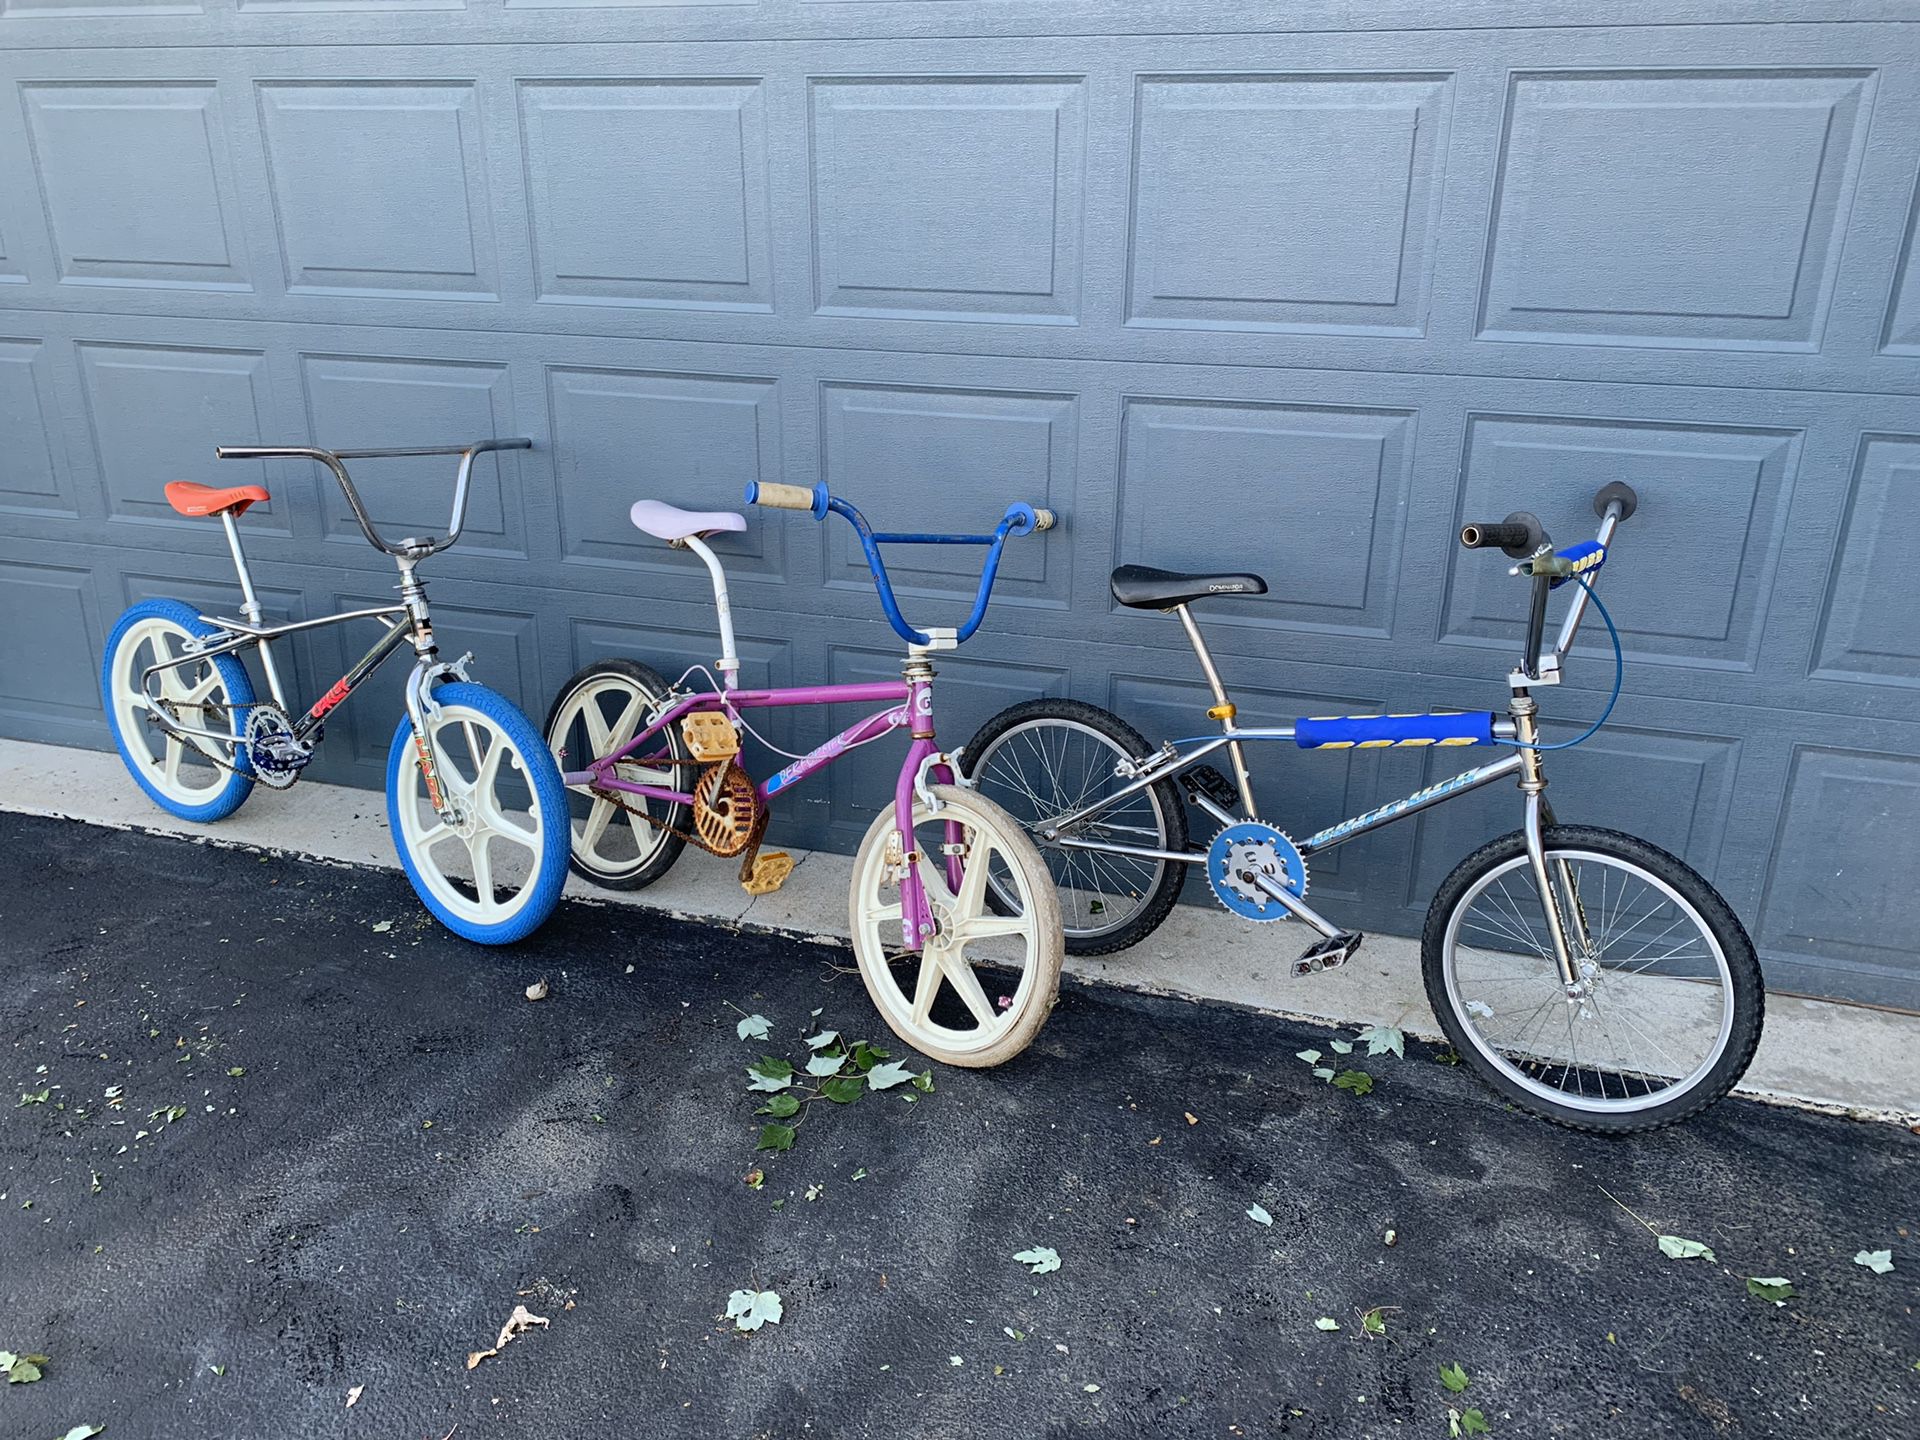 Buying old bmx bikes. Let me know if you have one for sale or want to consider selling